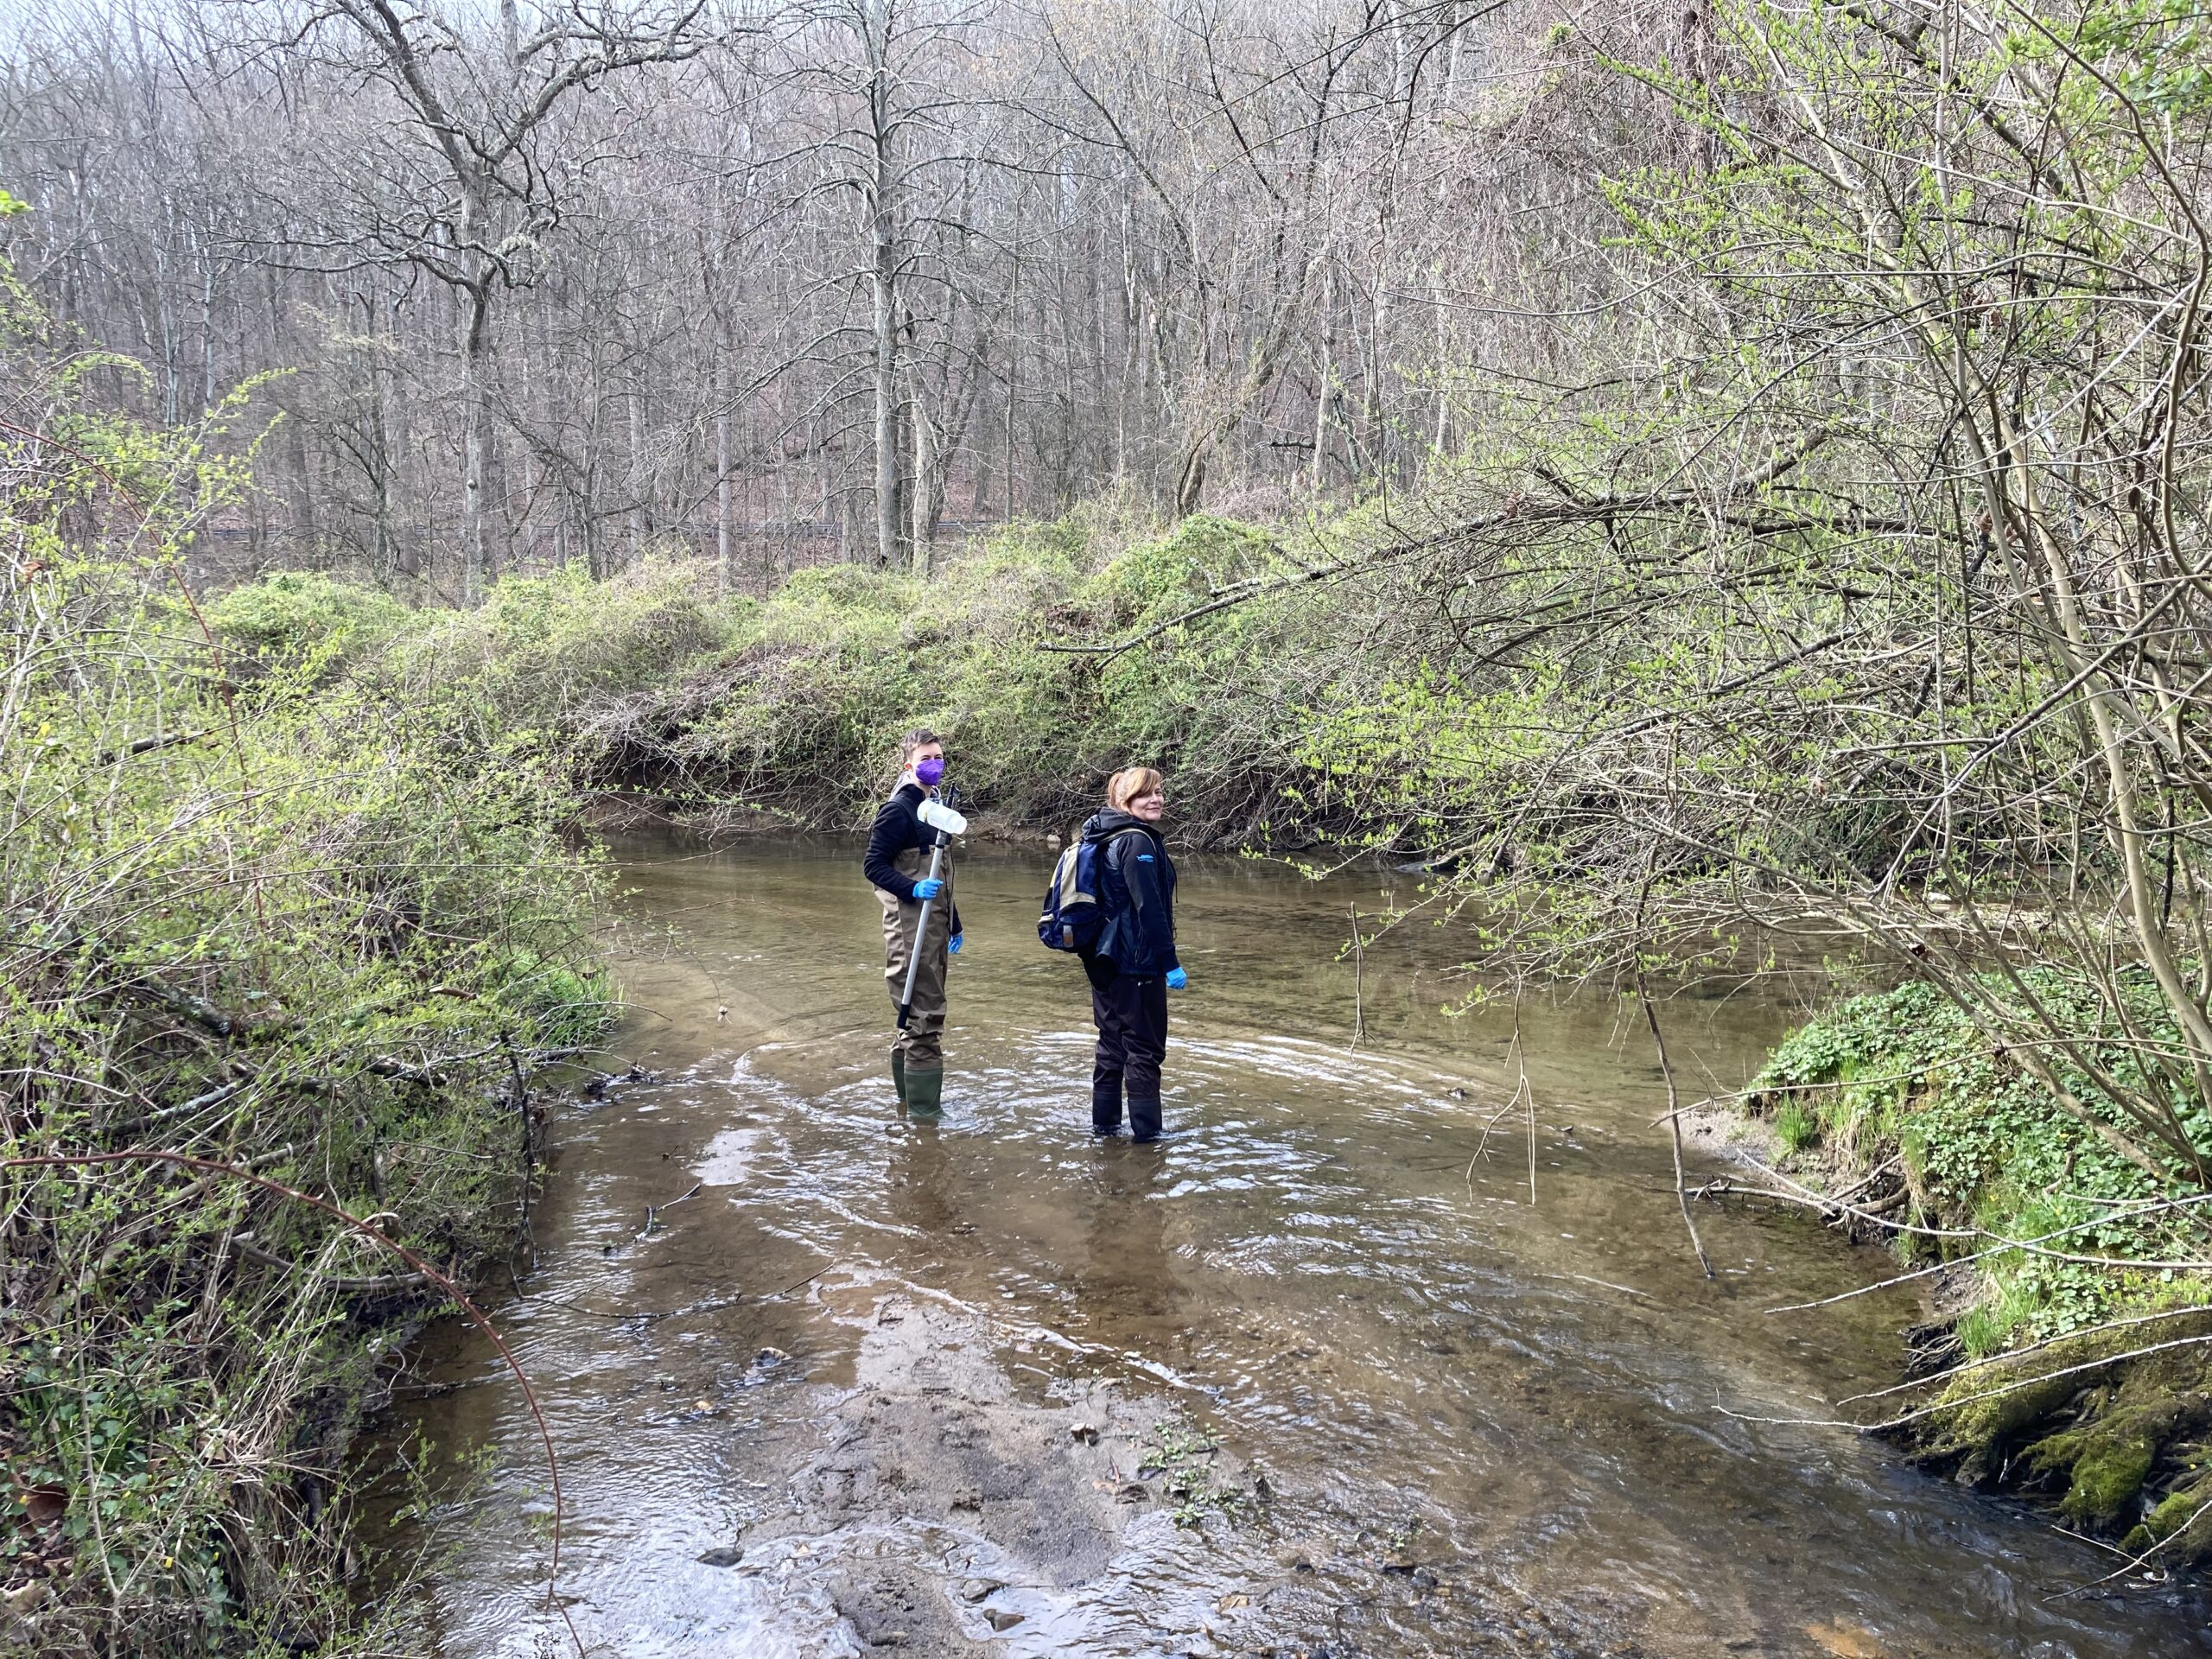 two people are standing in the middle of a stream